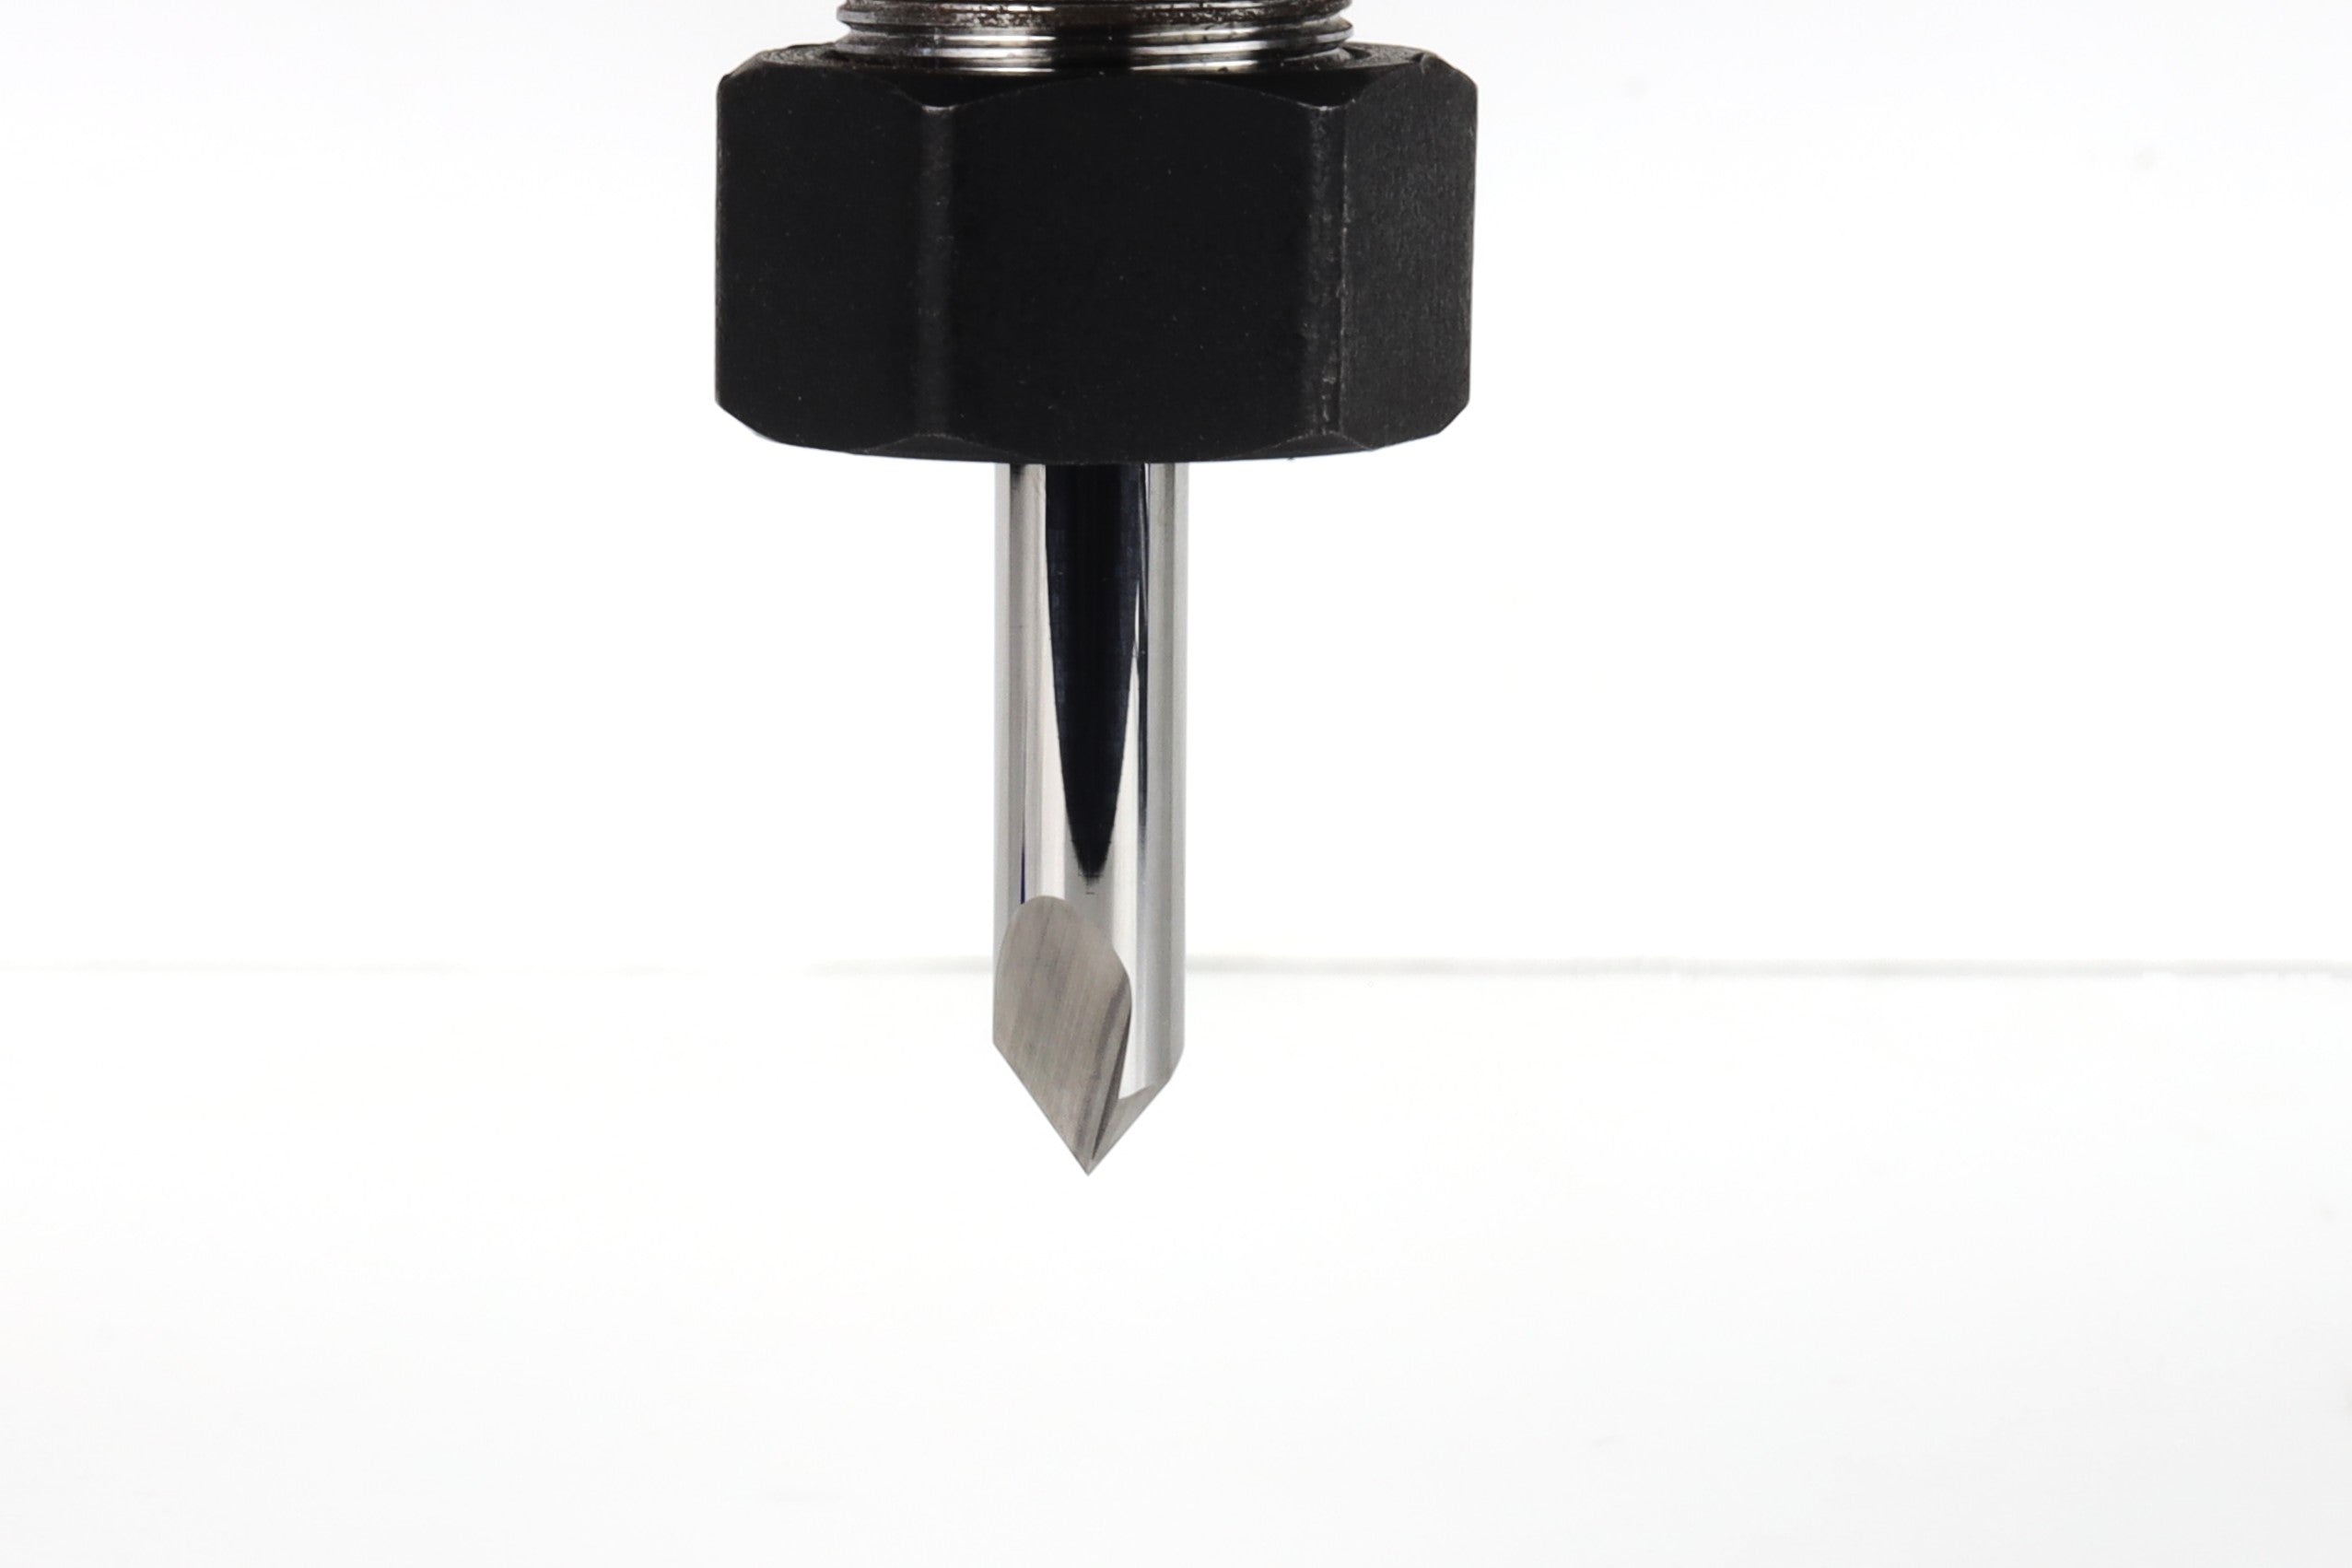 Ultra-Clean Cutting 90 Degree V-Bit for CNC Routers, 1/4 Shank